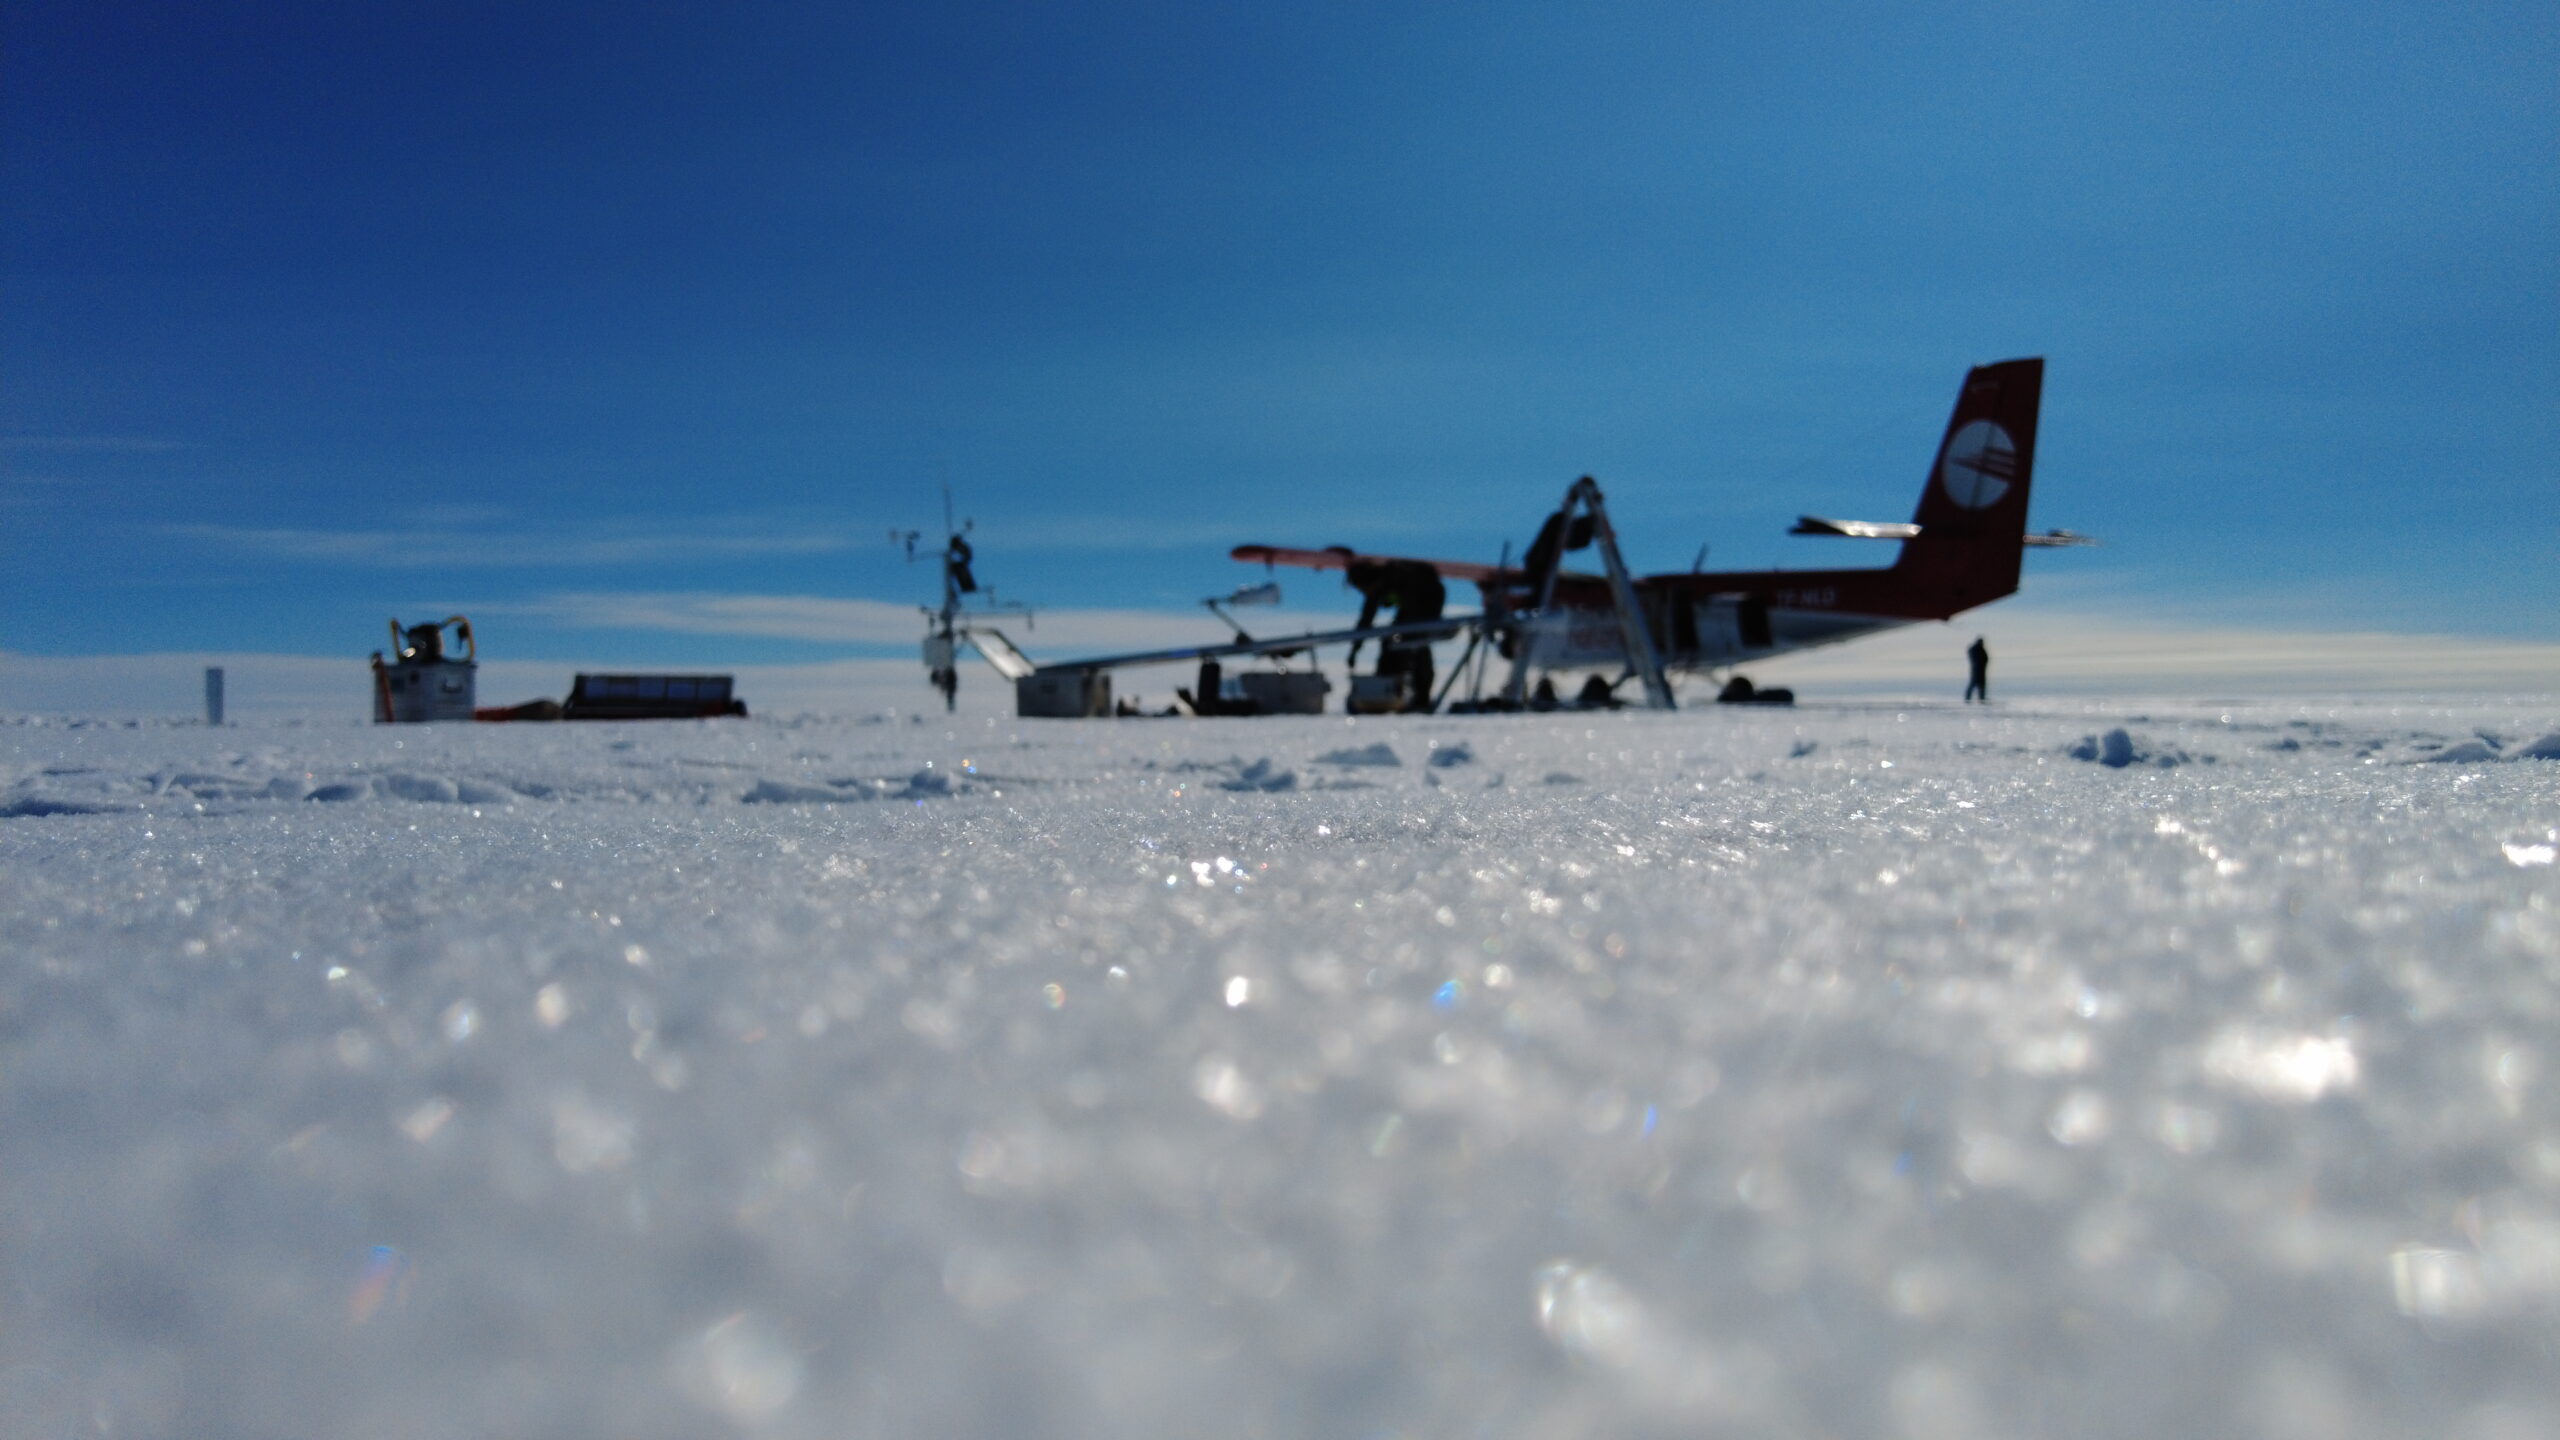 On the ice sheet. Snow crystals with blurry airplane in the background.